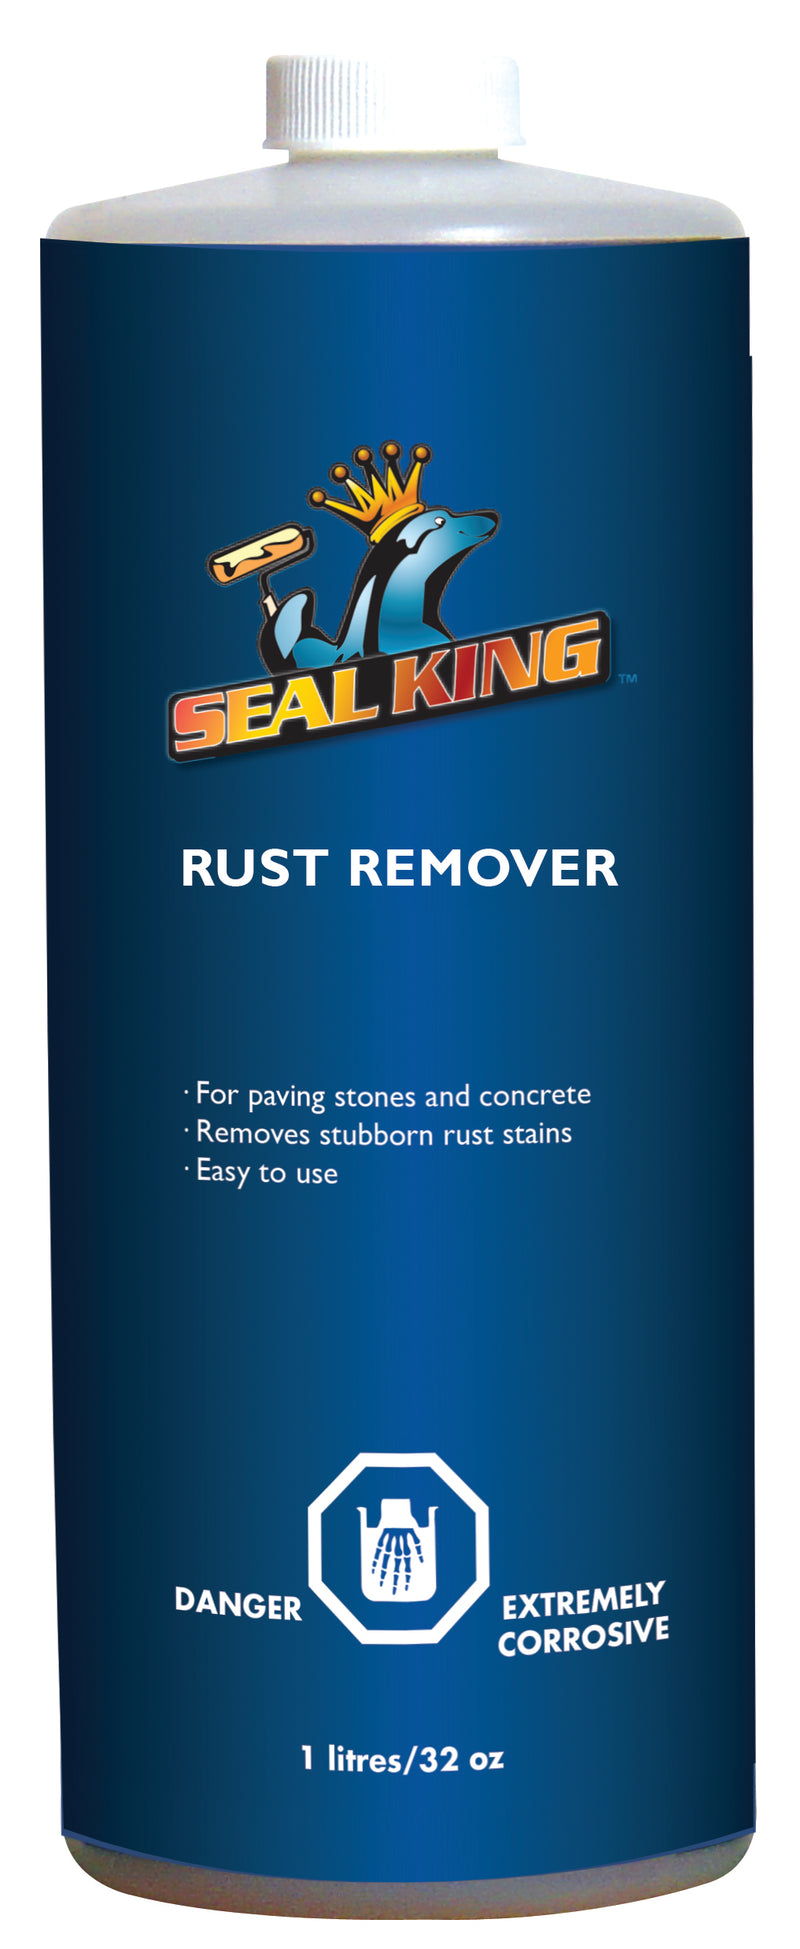 Seal King - Rust Remover 32oz